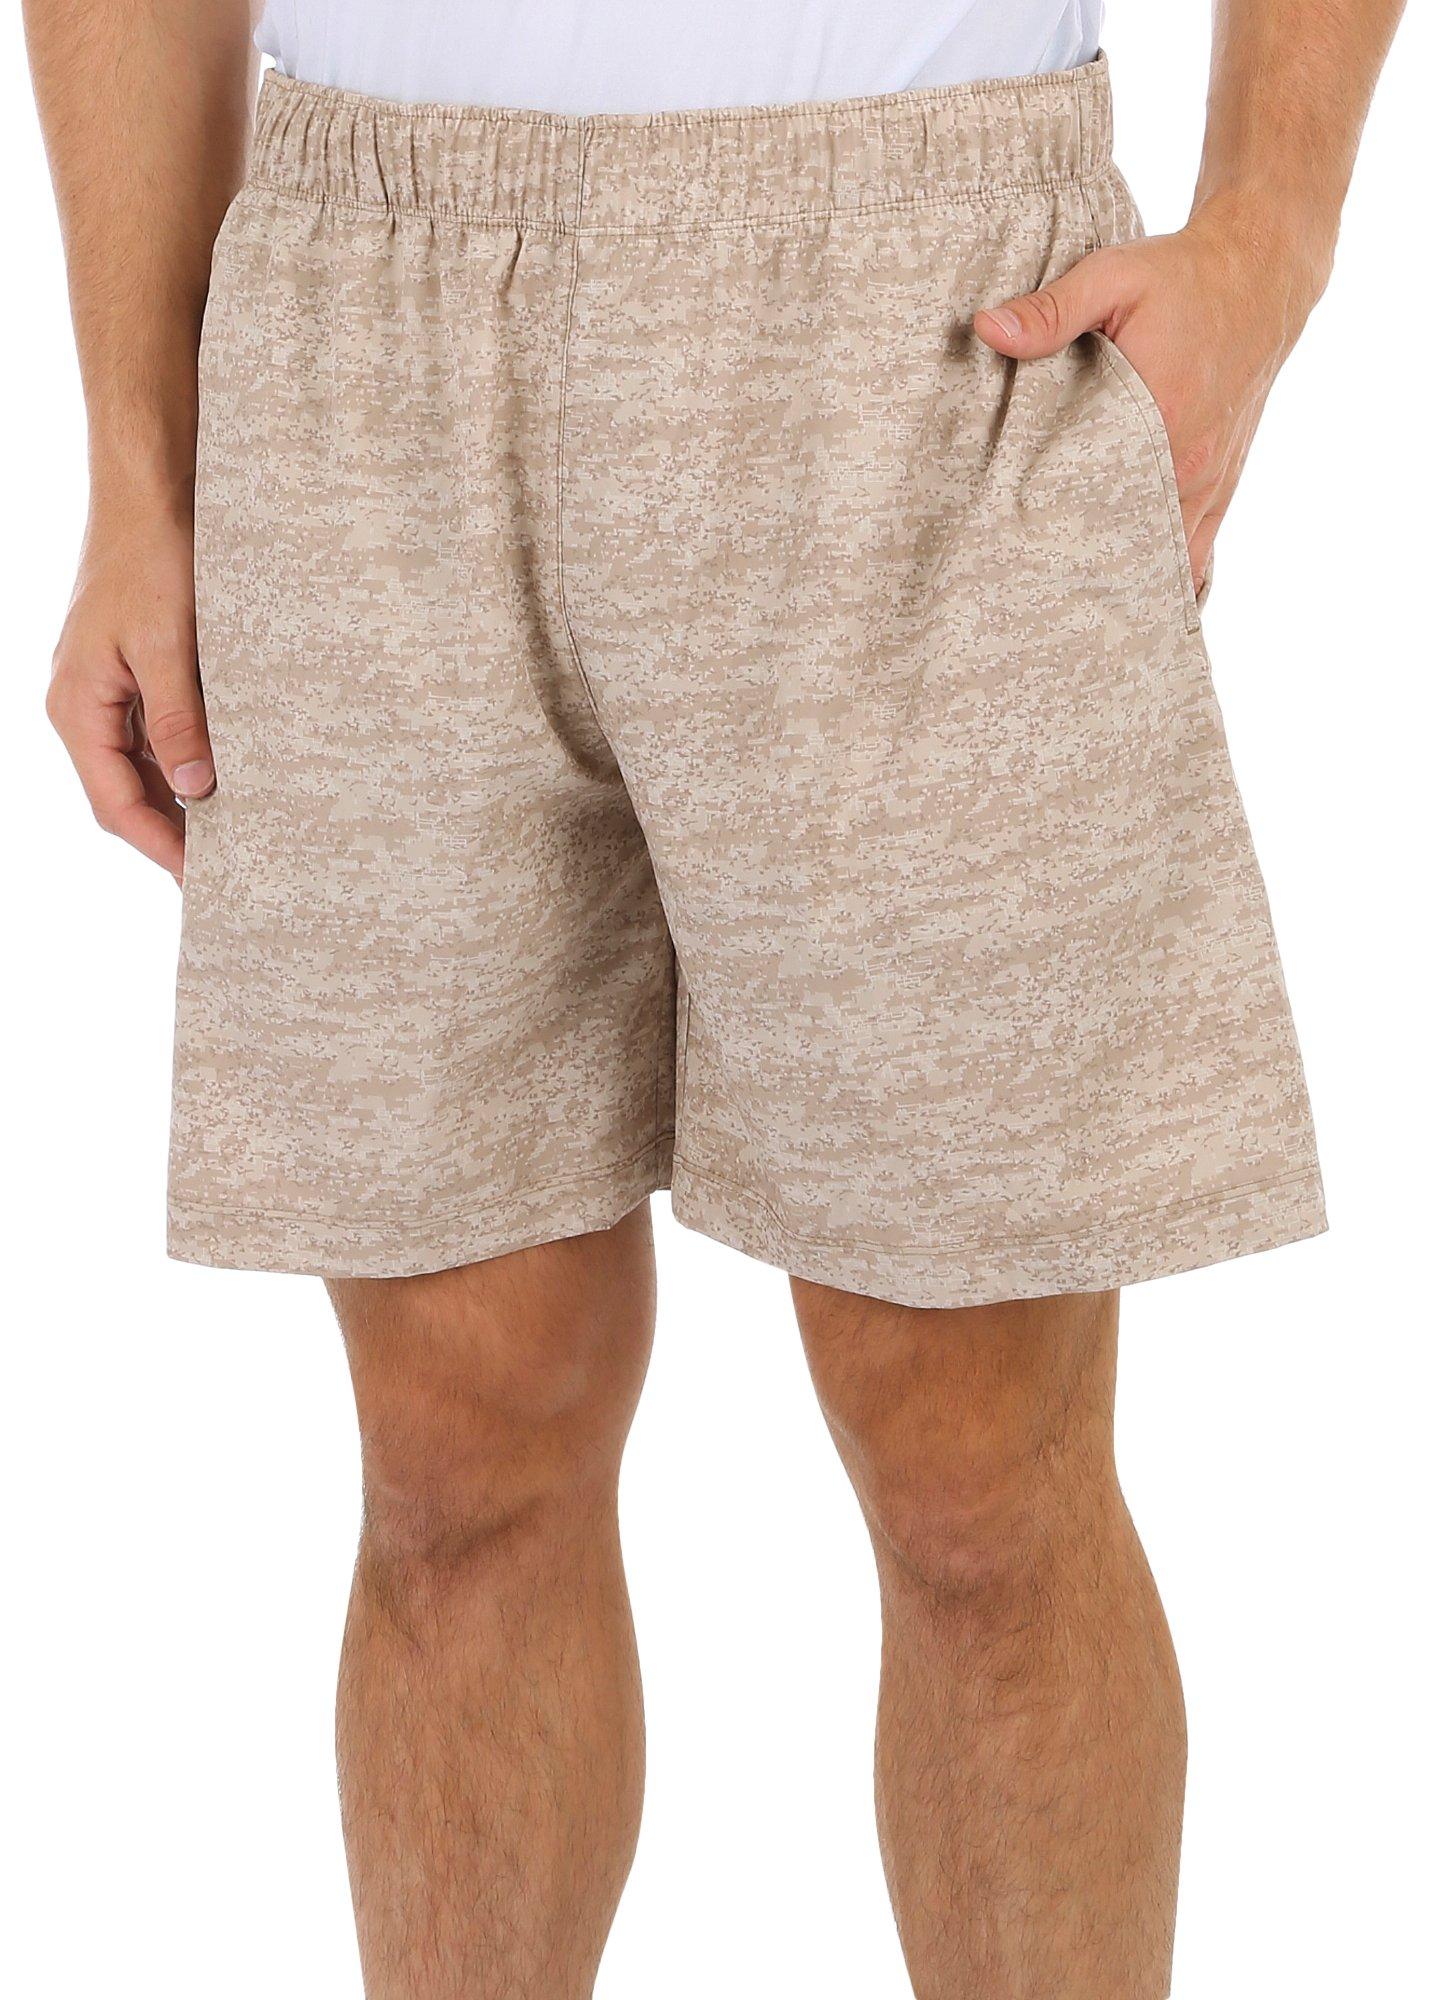 Mens 7 In. Camo Athletic Performance Shorts